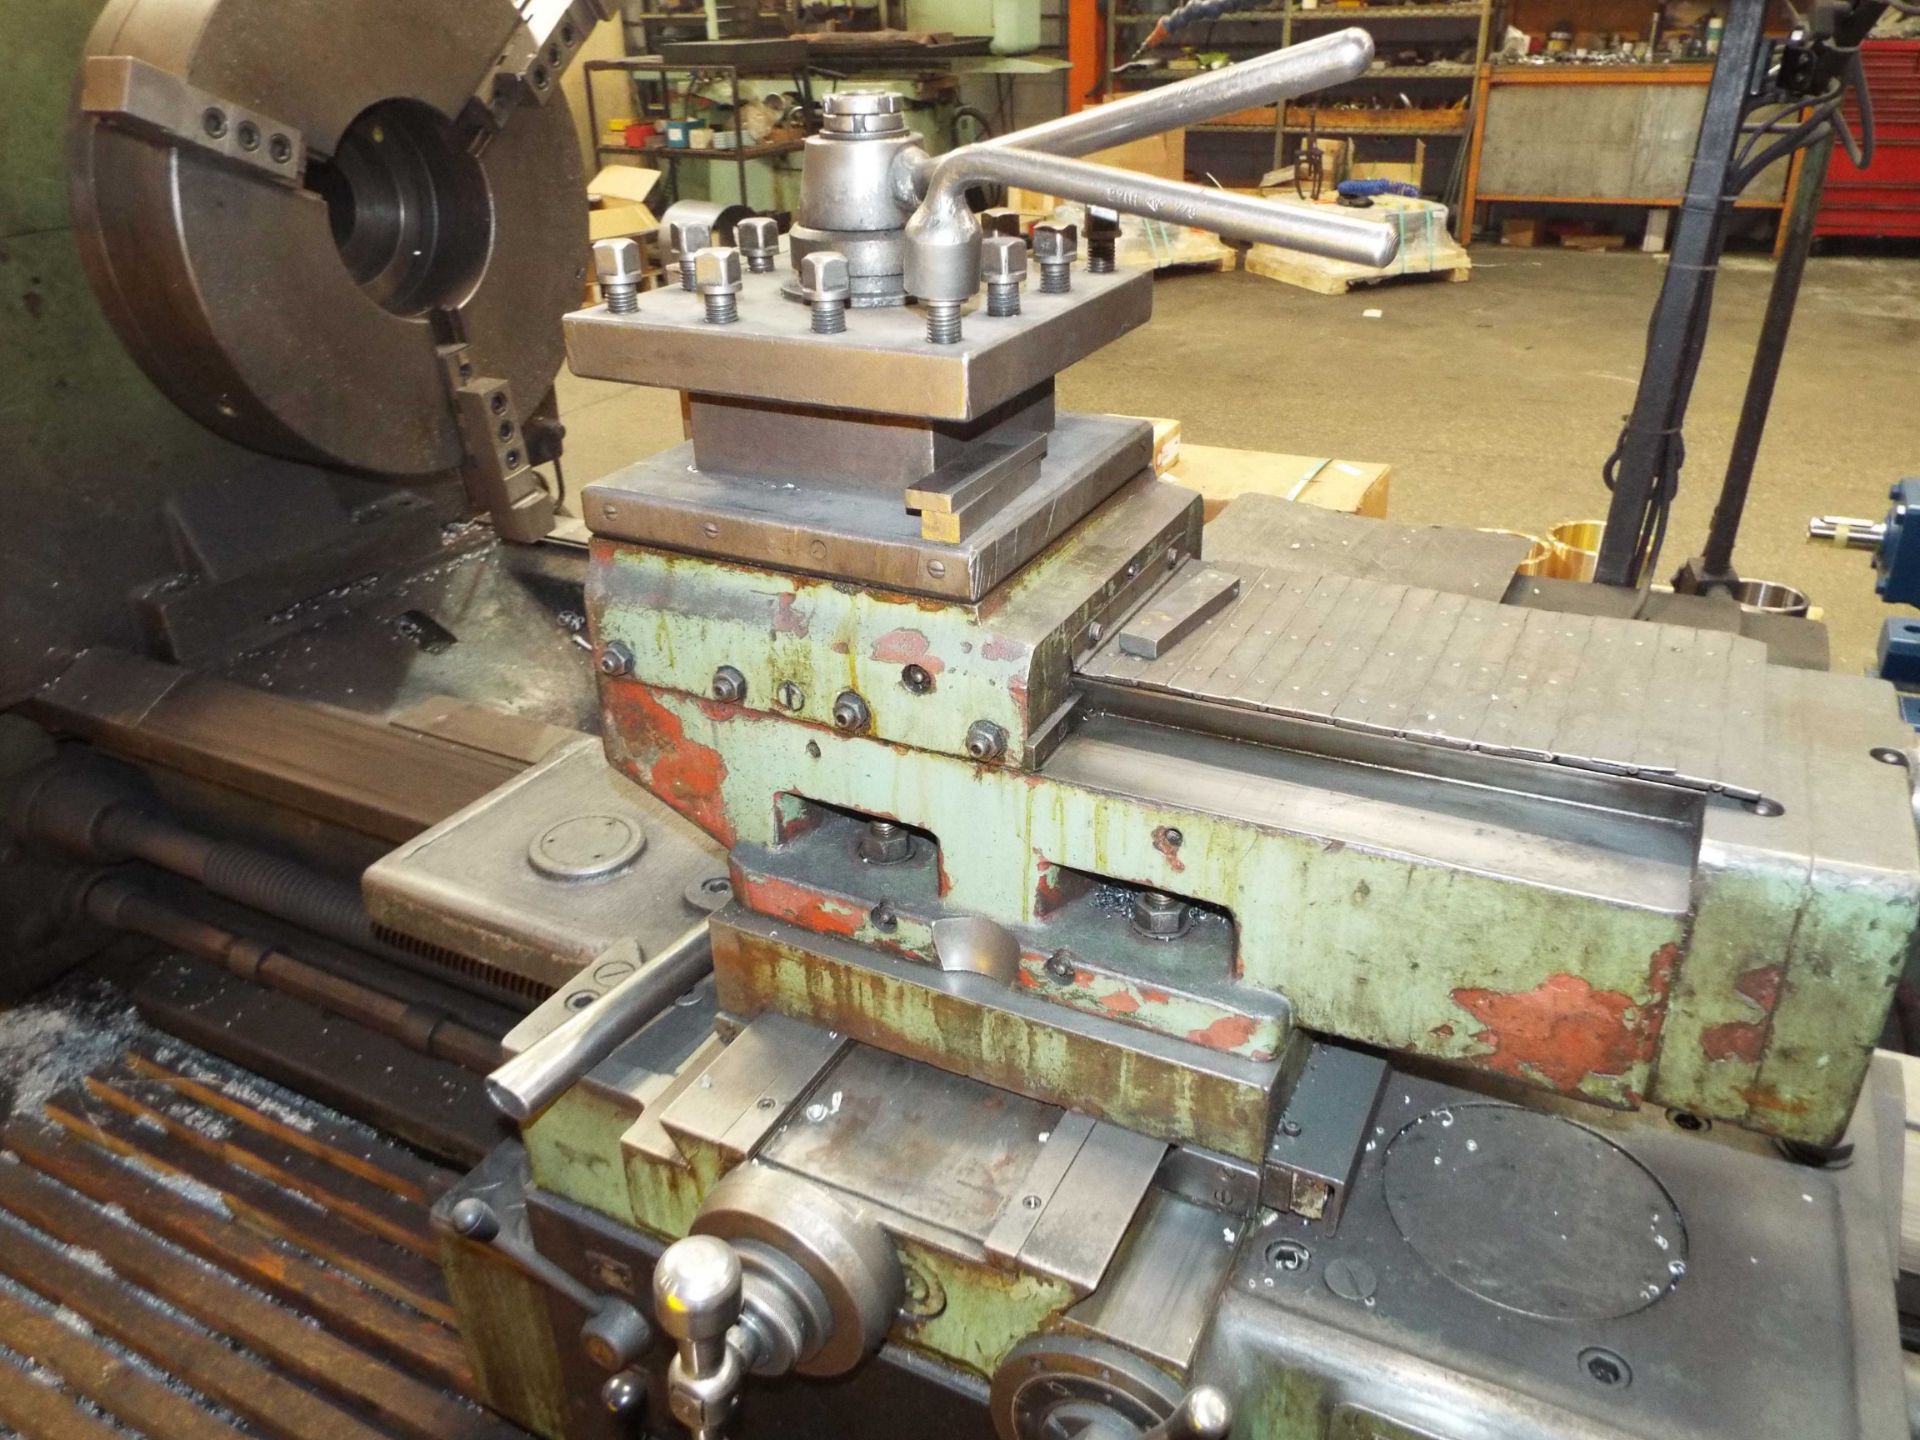 TOS CELAKOVICE SU100 LATHE WITH 48" SWING OVER BED, 204" DISTANCE BETWEEN CENTERS, 4" SPINDLE - Image 7 of 8